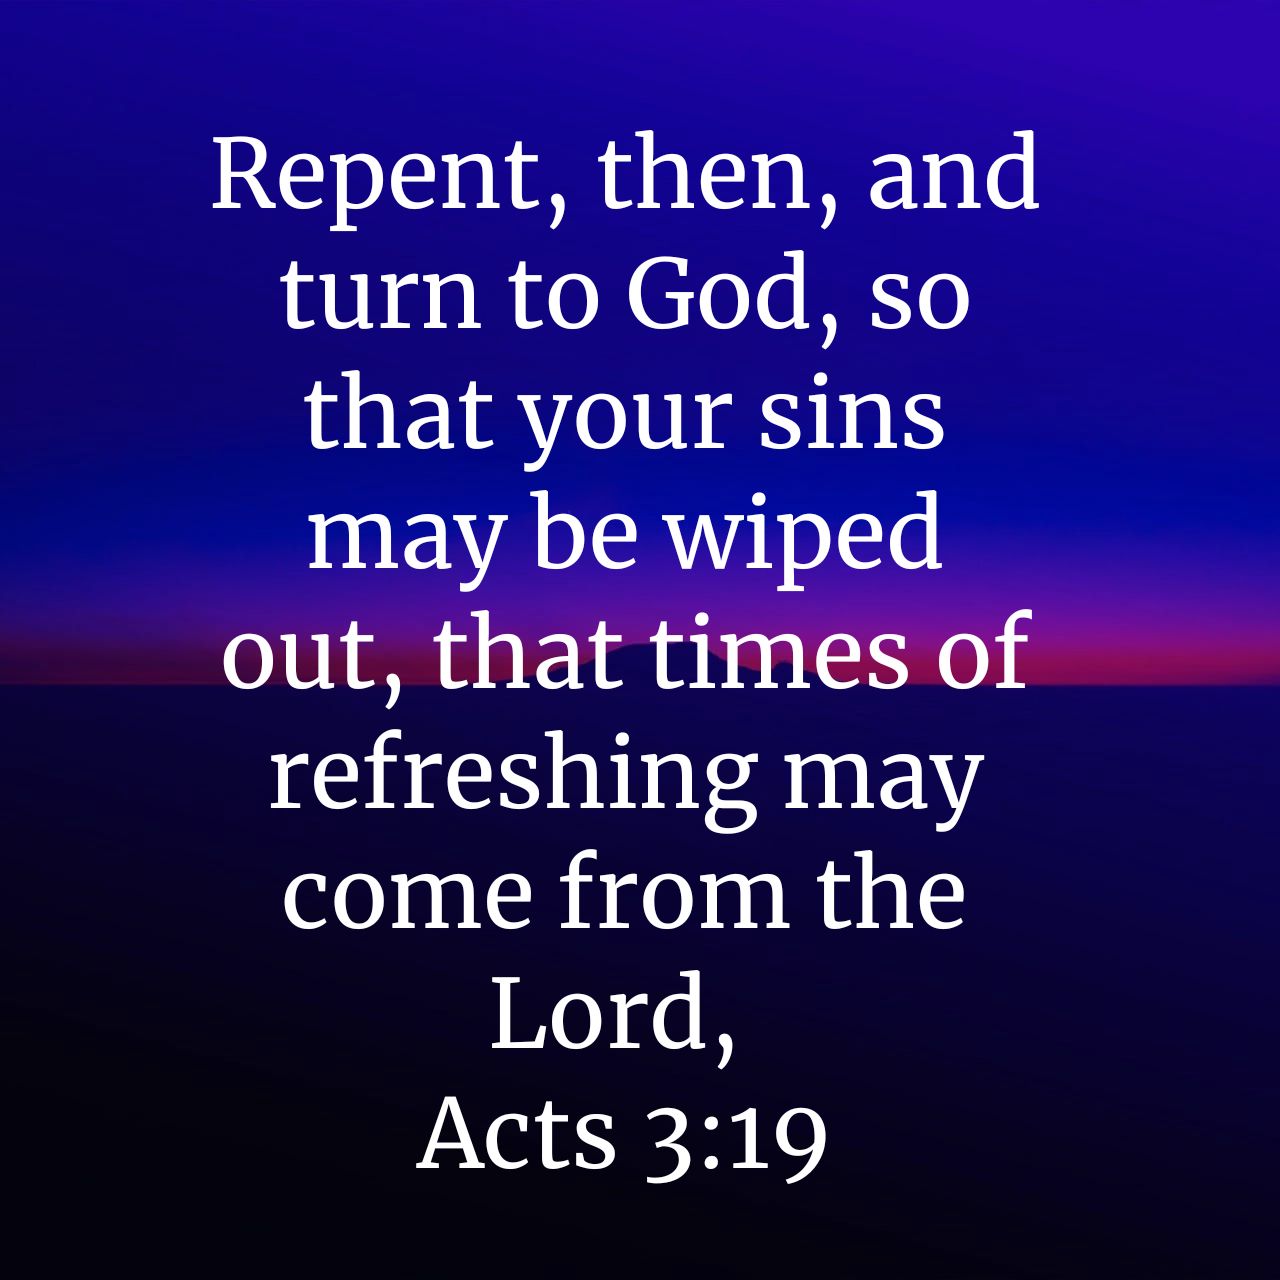 Repent; then, and turn to God, SO that your sins may be wiped out, that times of refreshing may come from the Lord, Acts 3.19